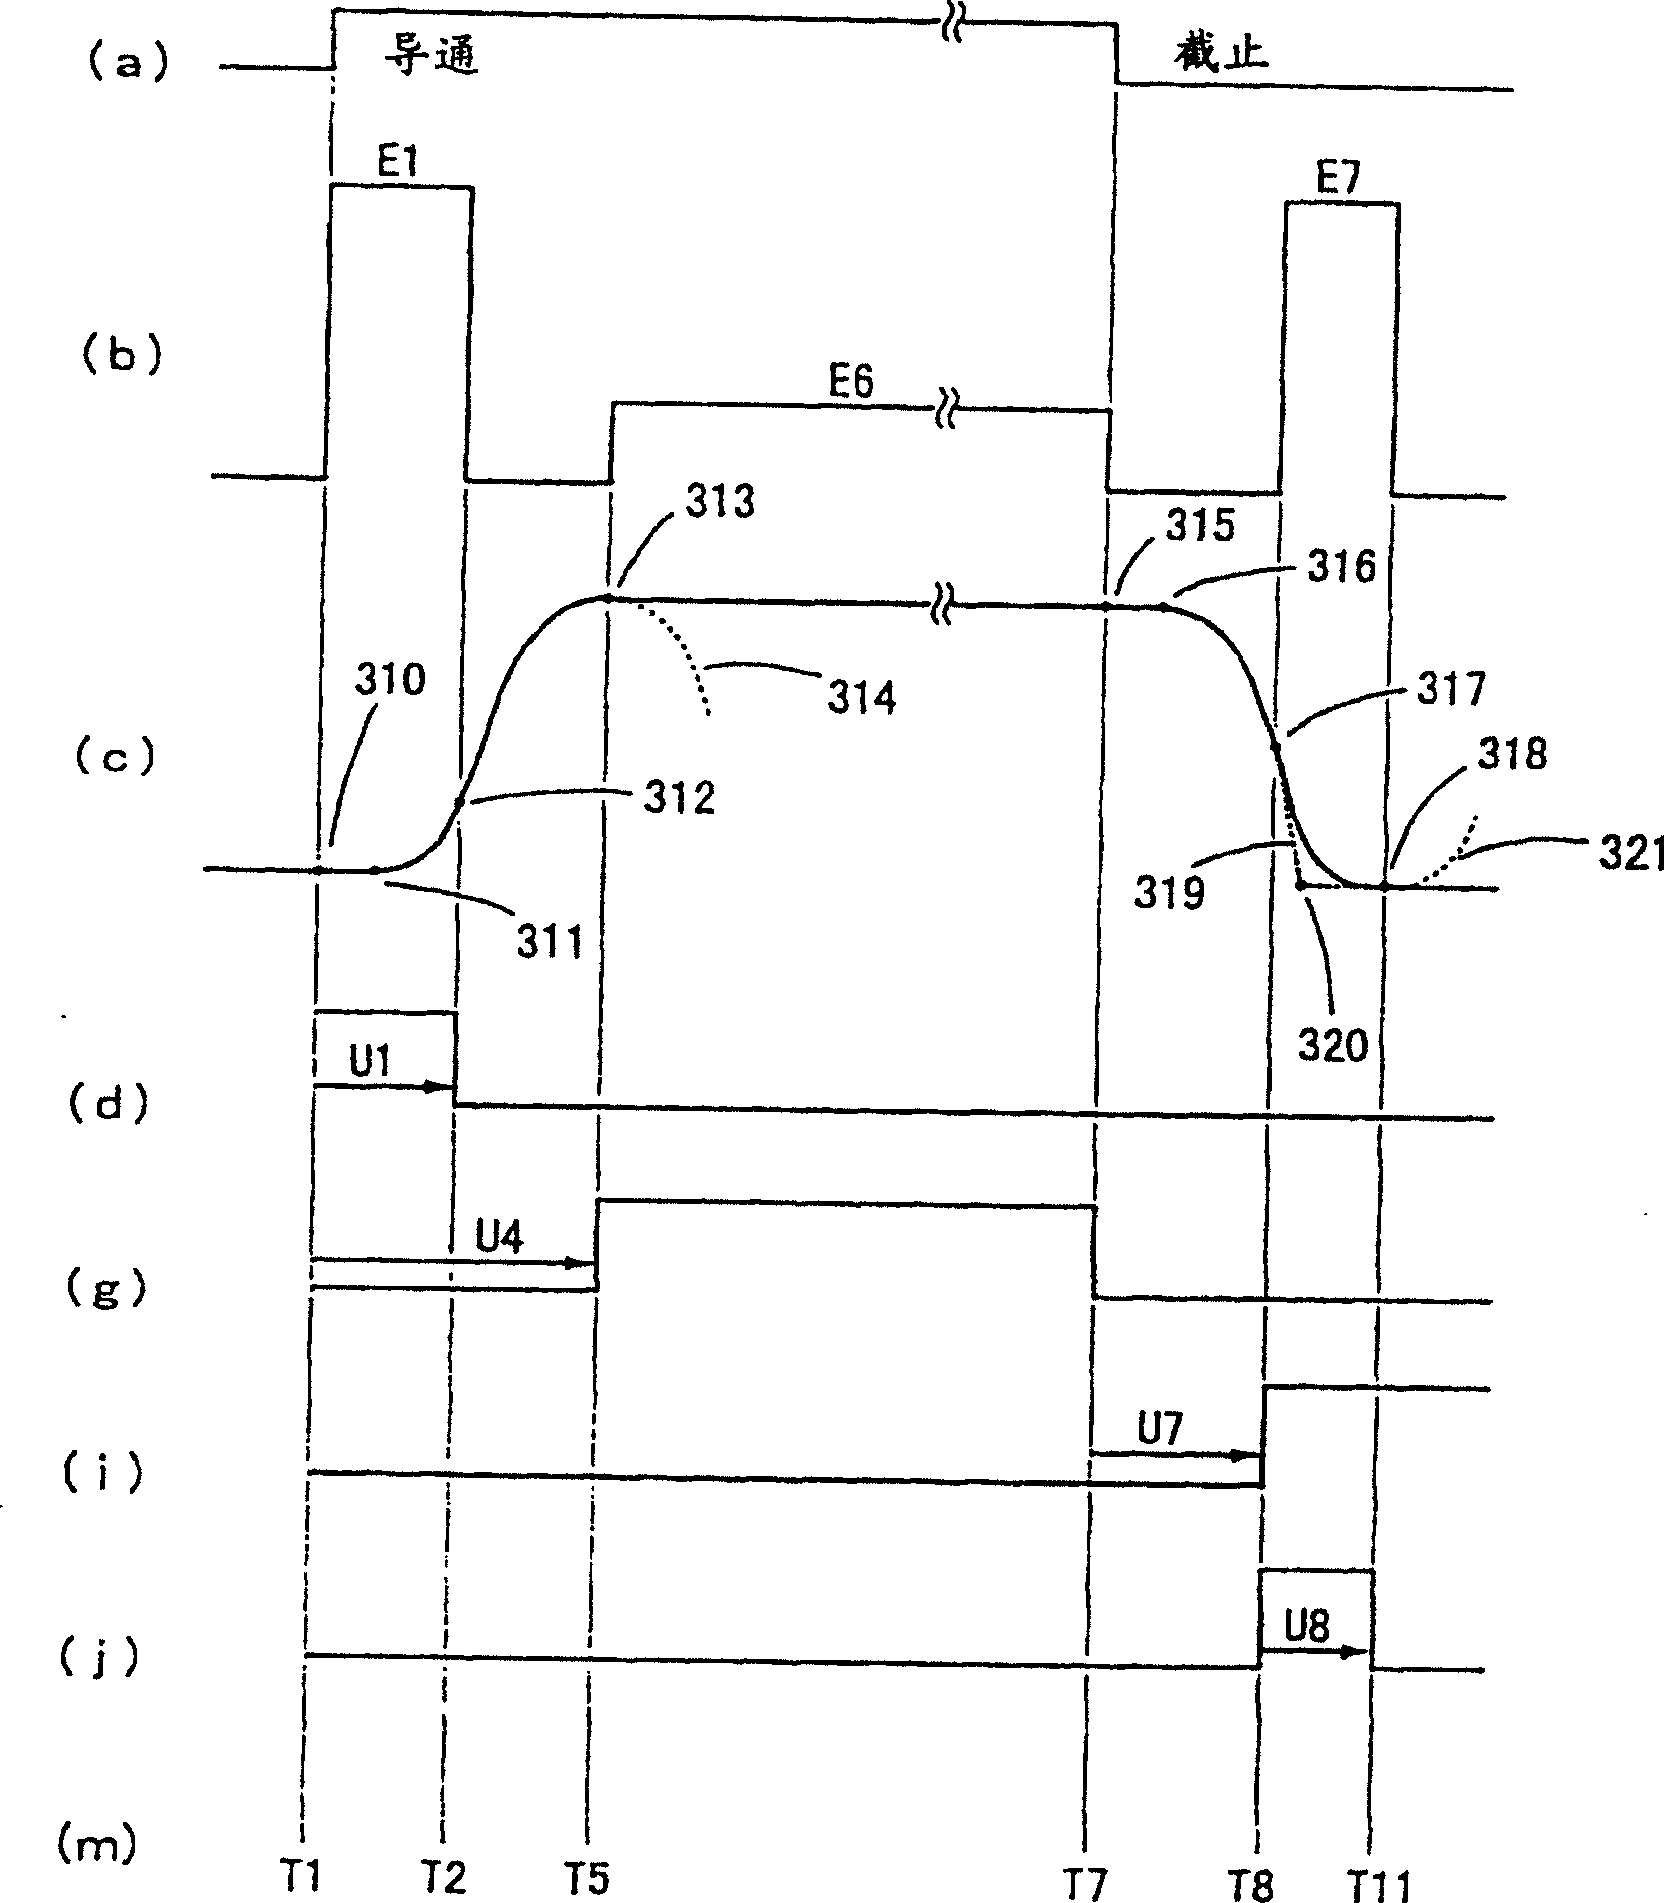 Electromagnetic contactor